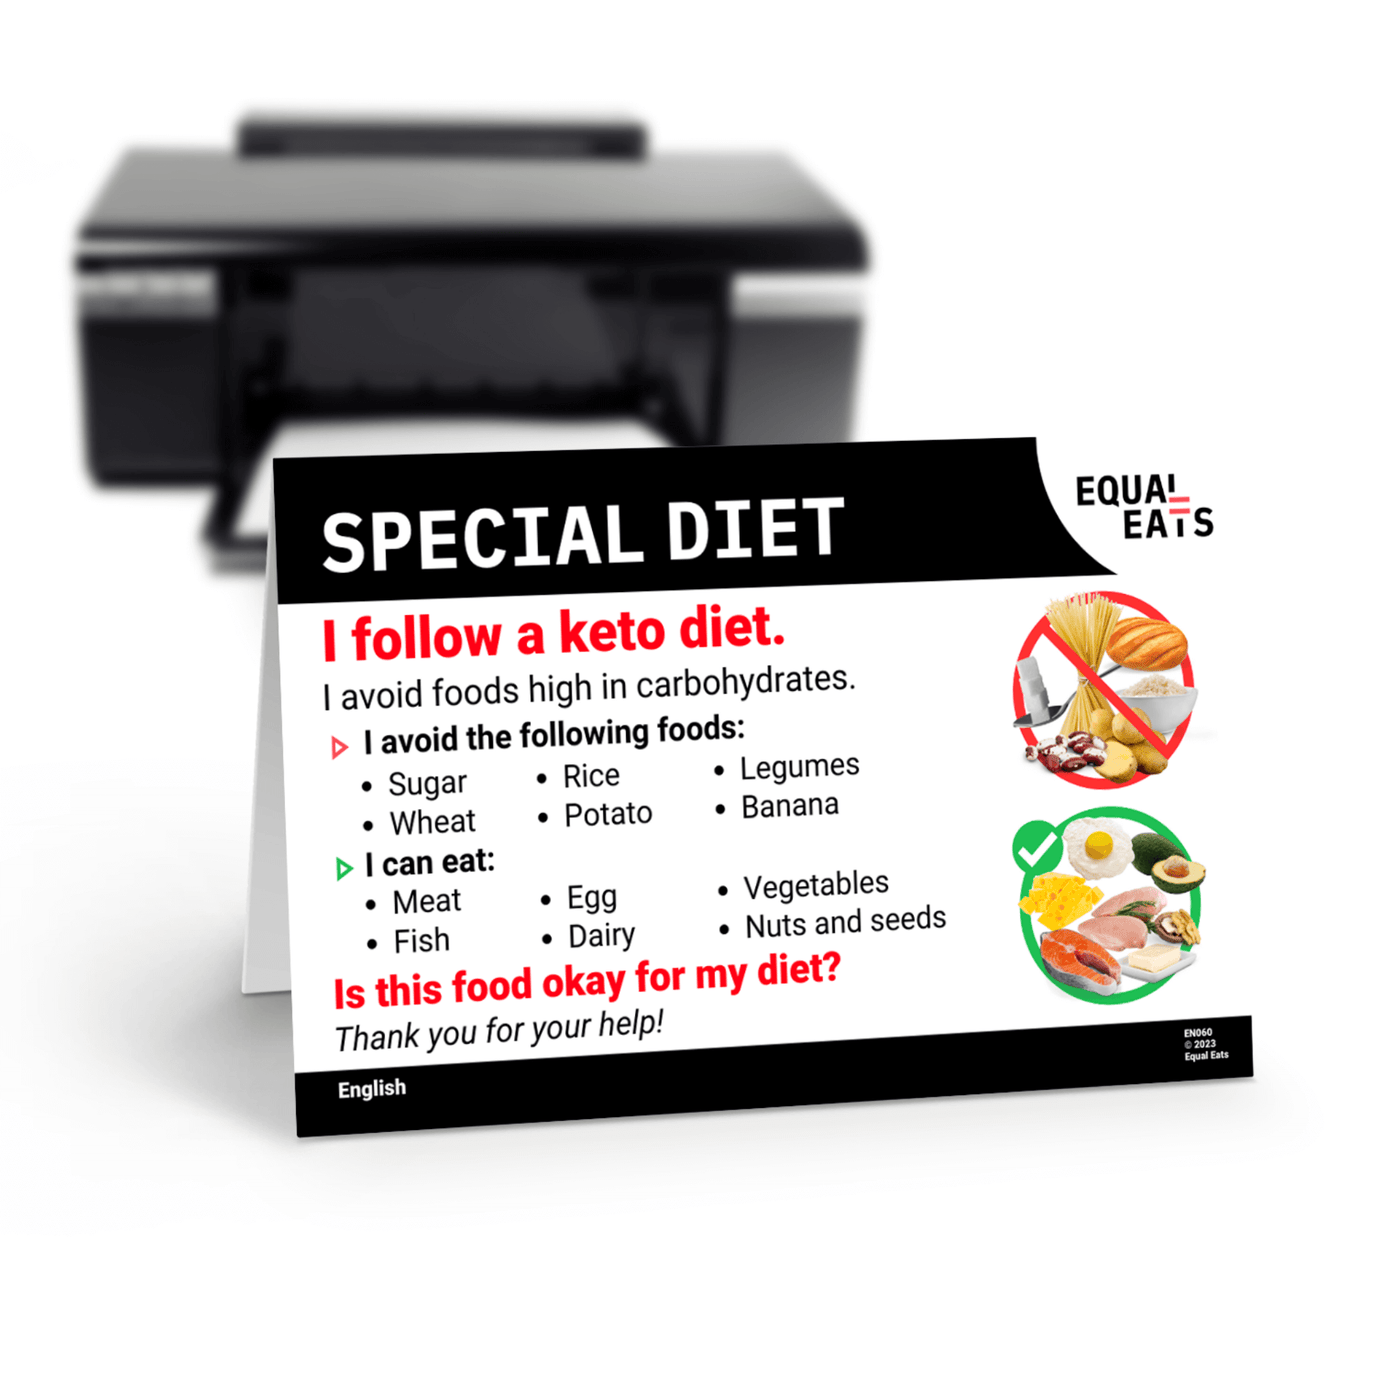 Keto Diet Card by Equal Eats